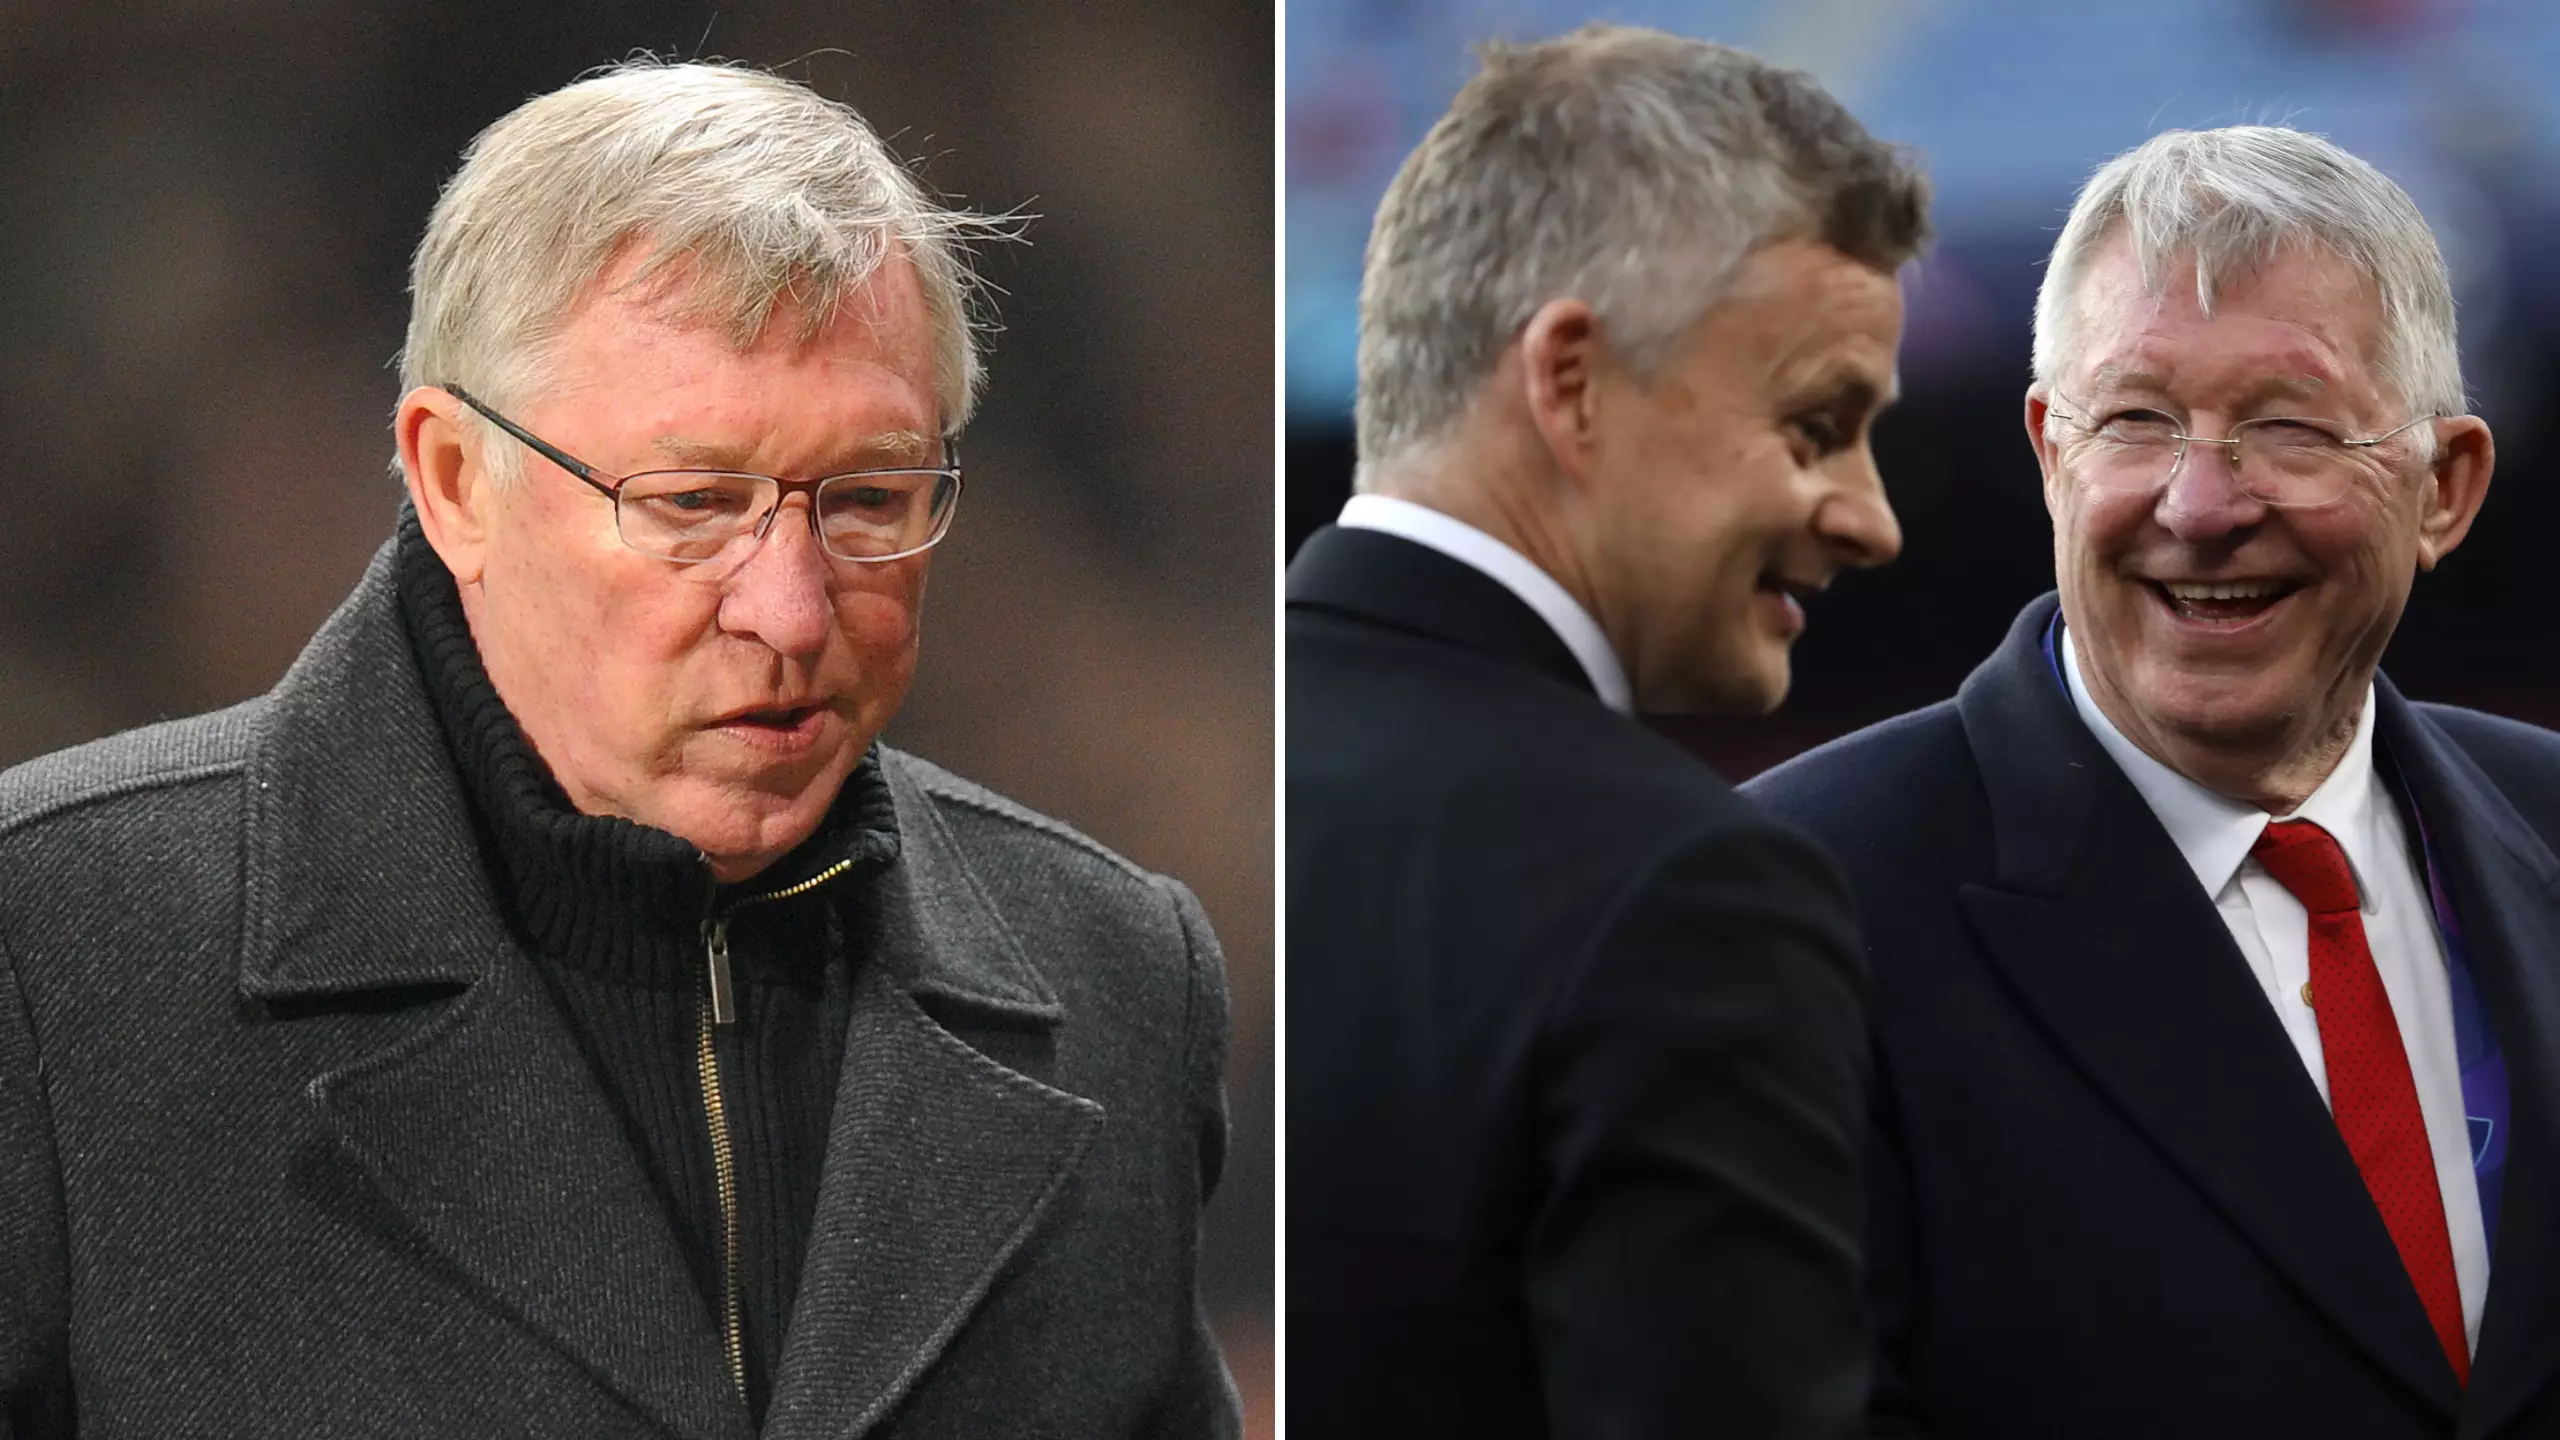 Sir Alex Ferguson's Transfer Recommendation Told He'd 'Walk Into' Manchester United's Midfield